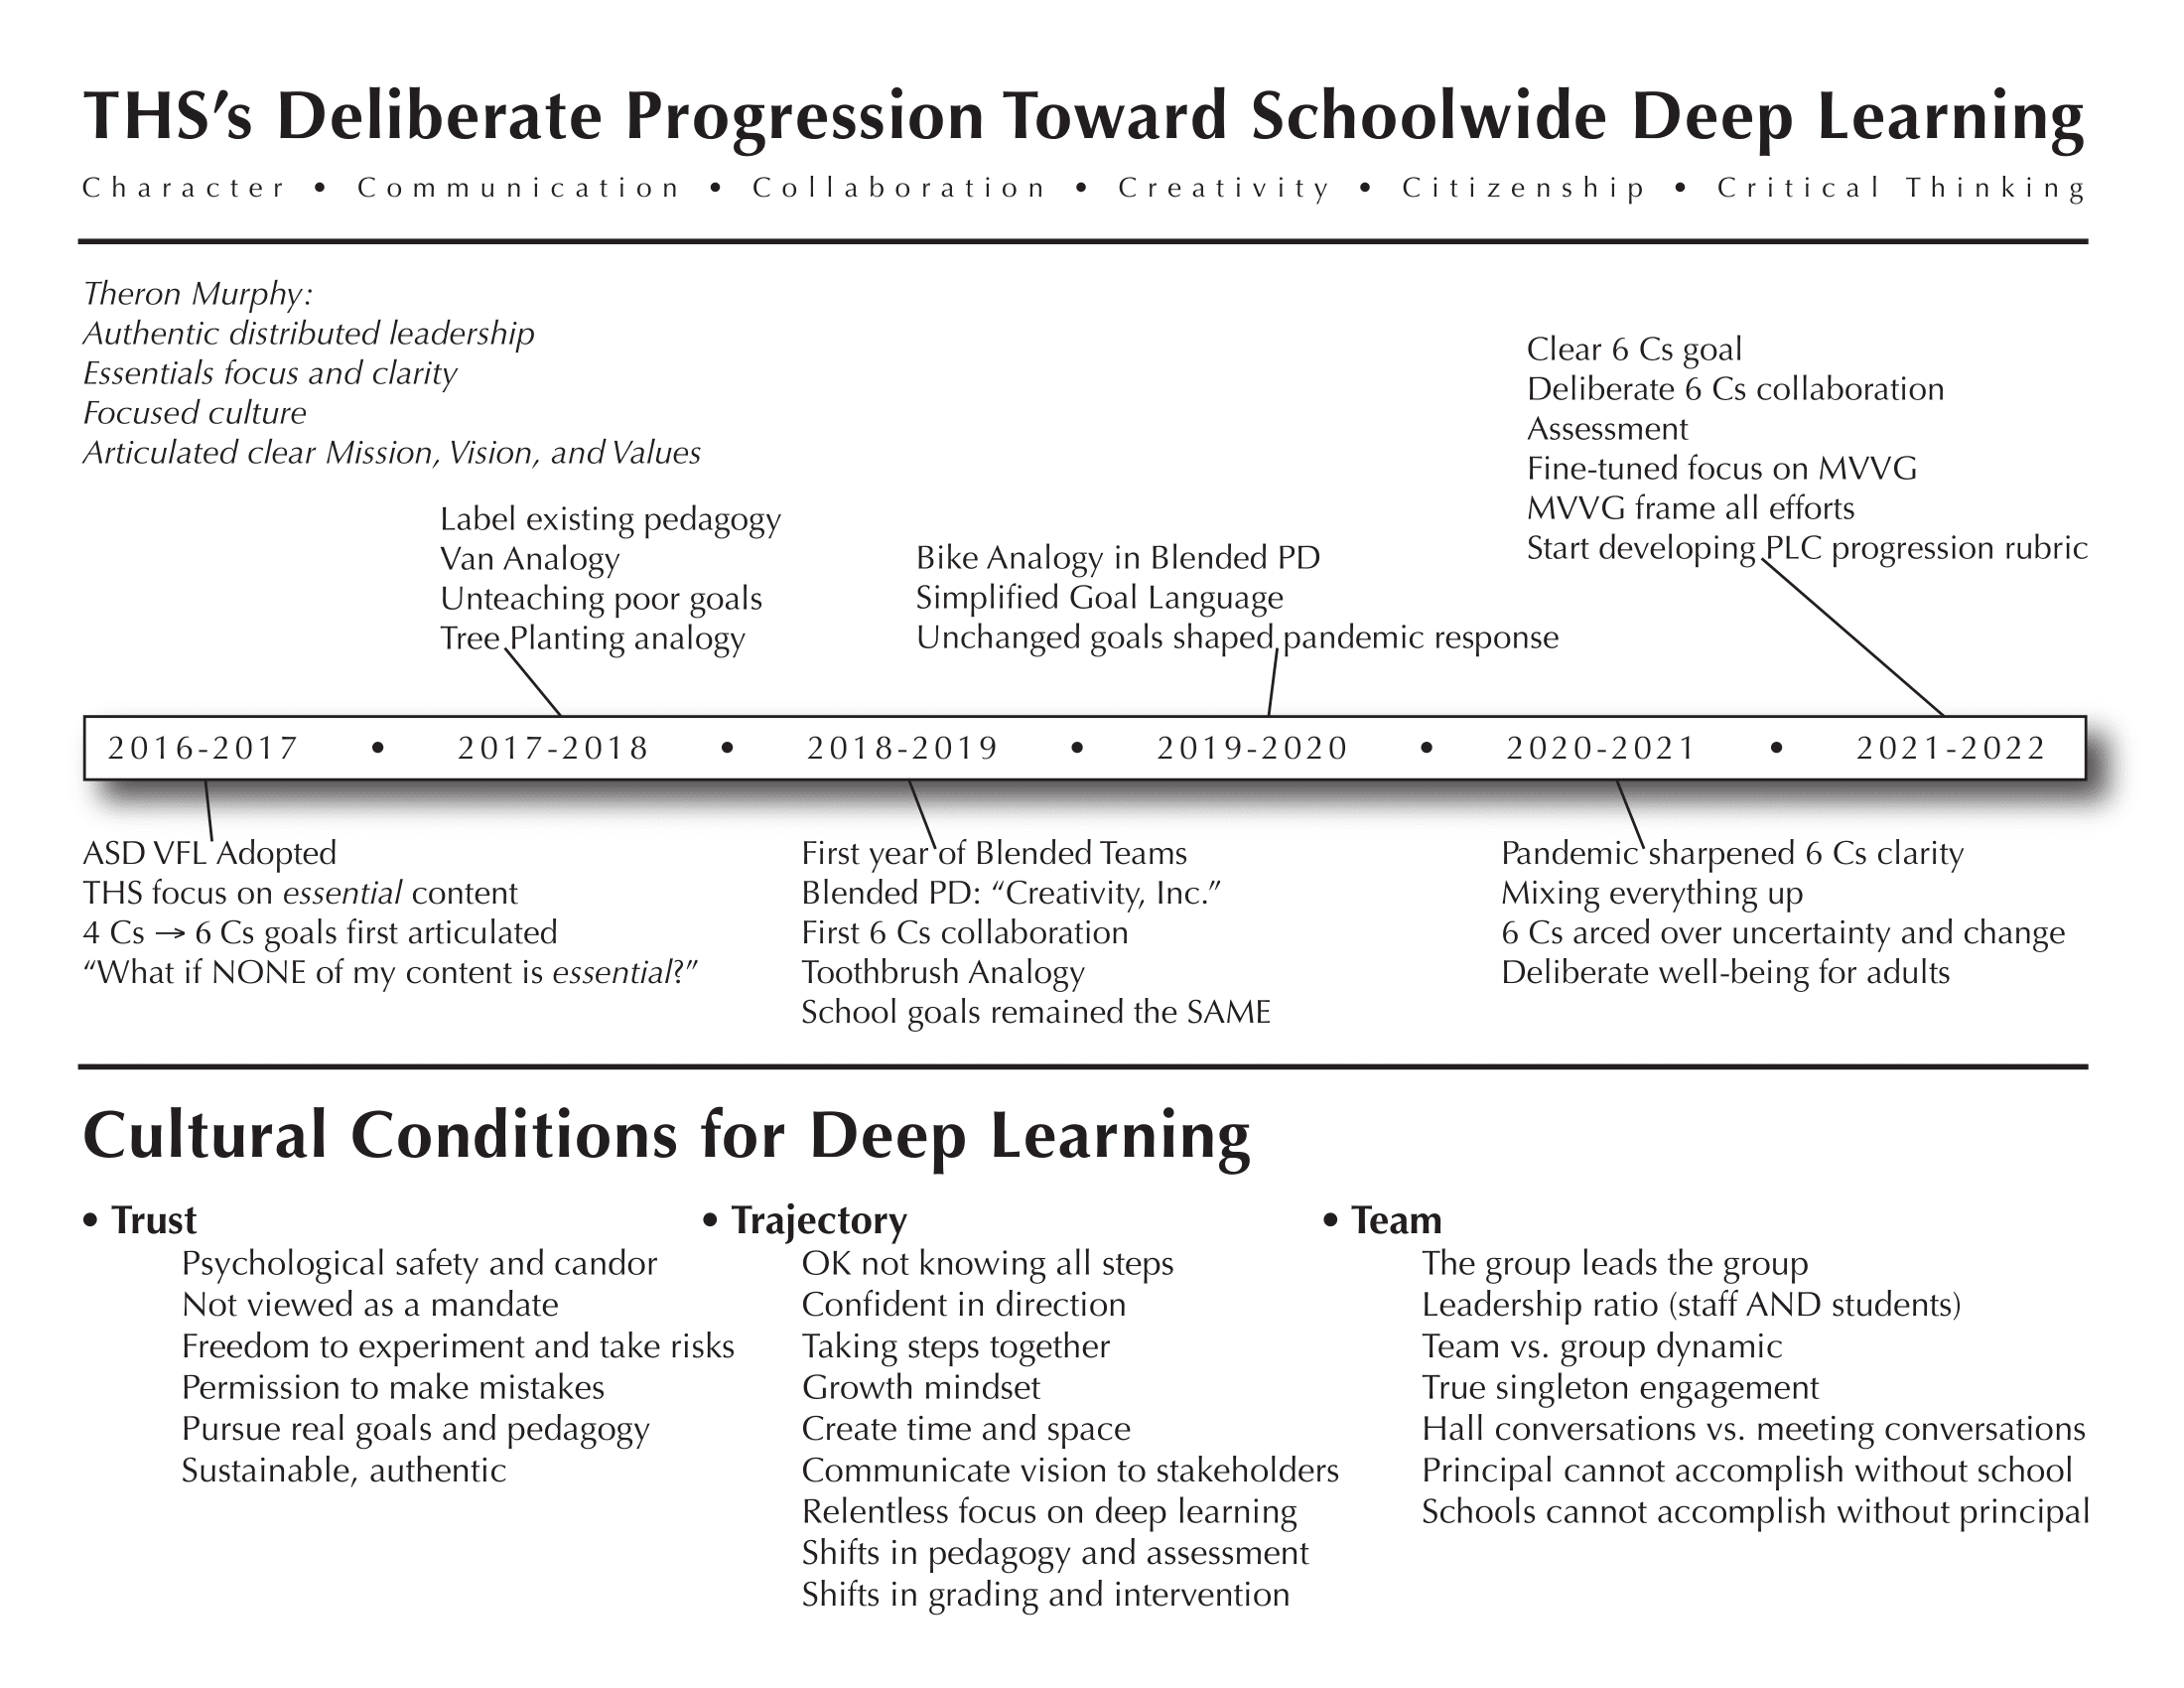 Chart describing THS Progression and Conditions for Schoolwide Deeper Learning